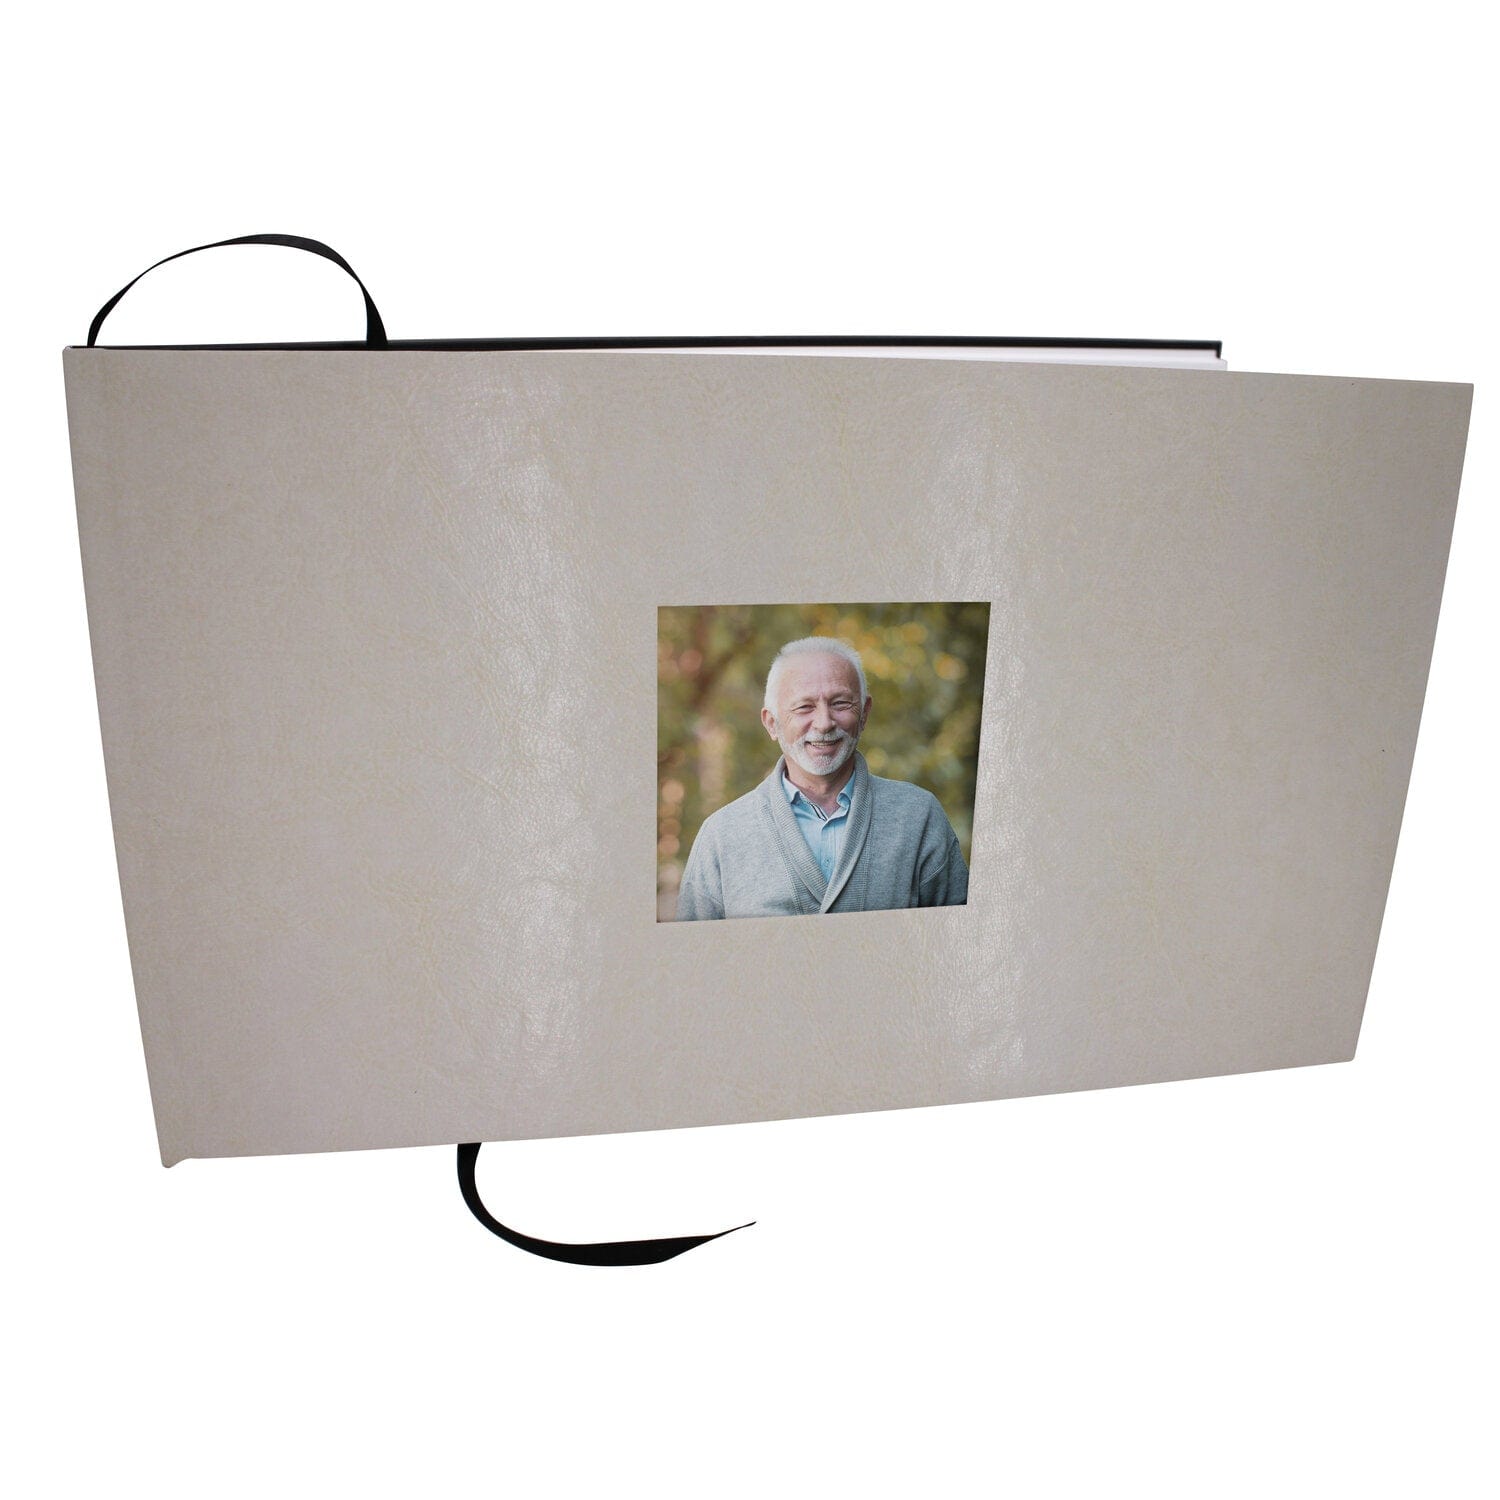 Commemorative Cremation Urns White Textured Guest Book for Funeral or Memorial Service